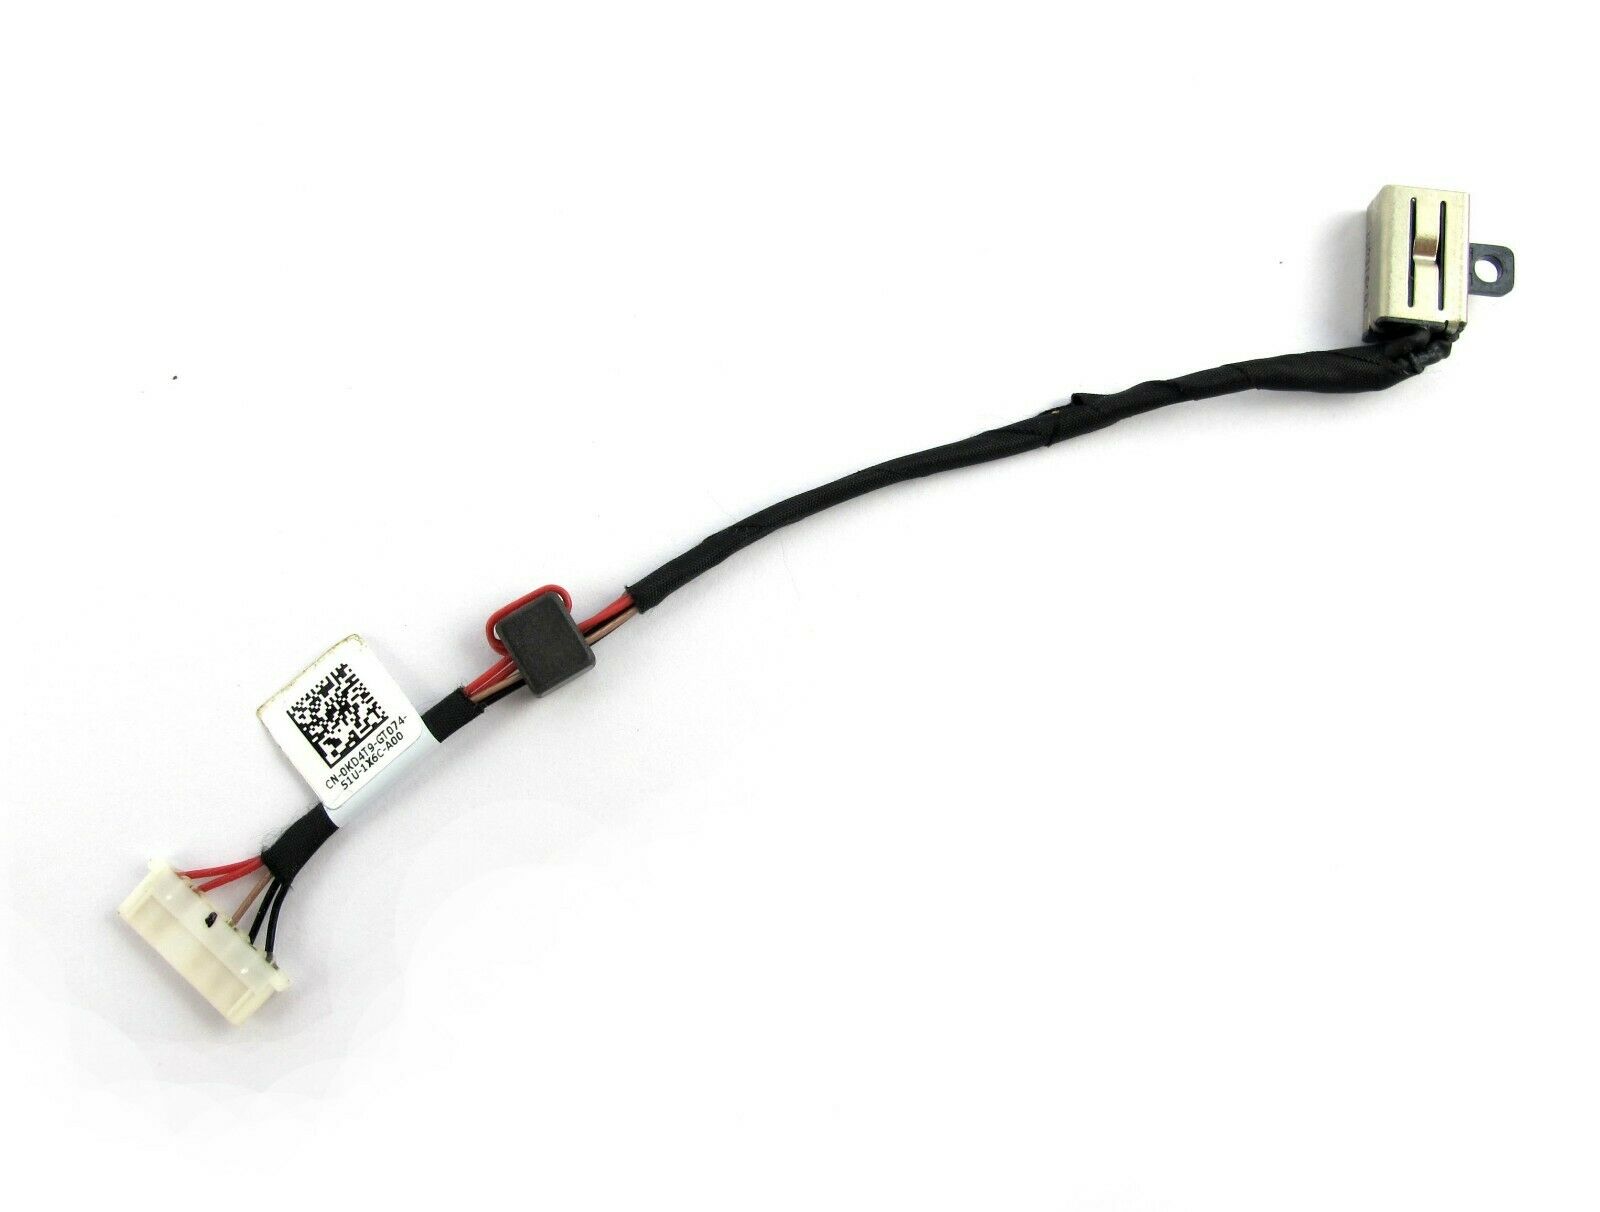 New DC Power Jack Cable for Dell Inspiron Vostro 3551 3552 3558 3559 0KD4T9 Compa